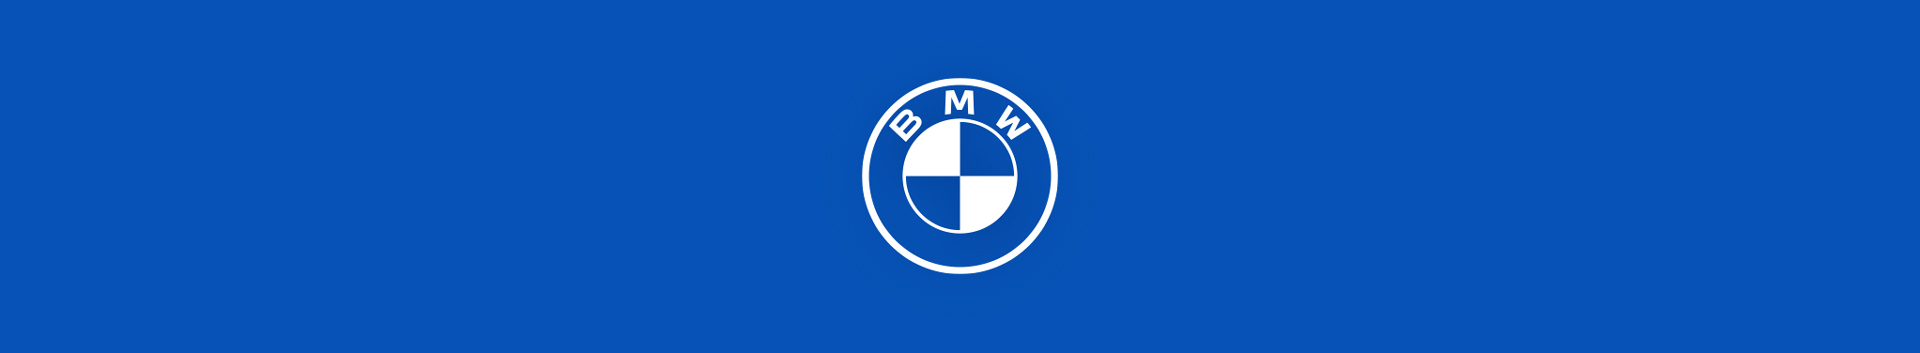 BMW roundel logo in white on top of a BMW-blue background.